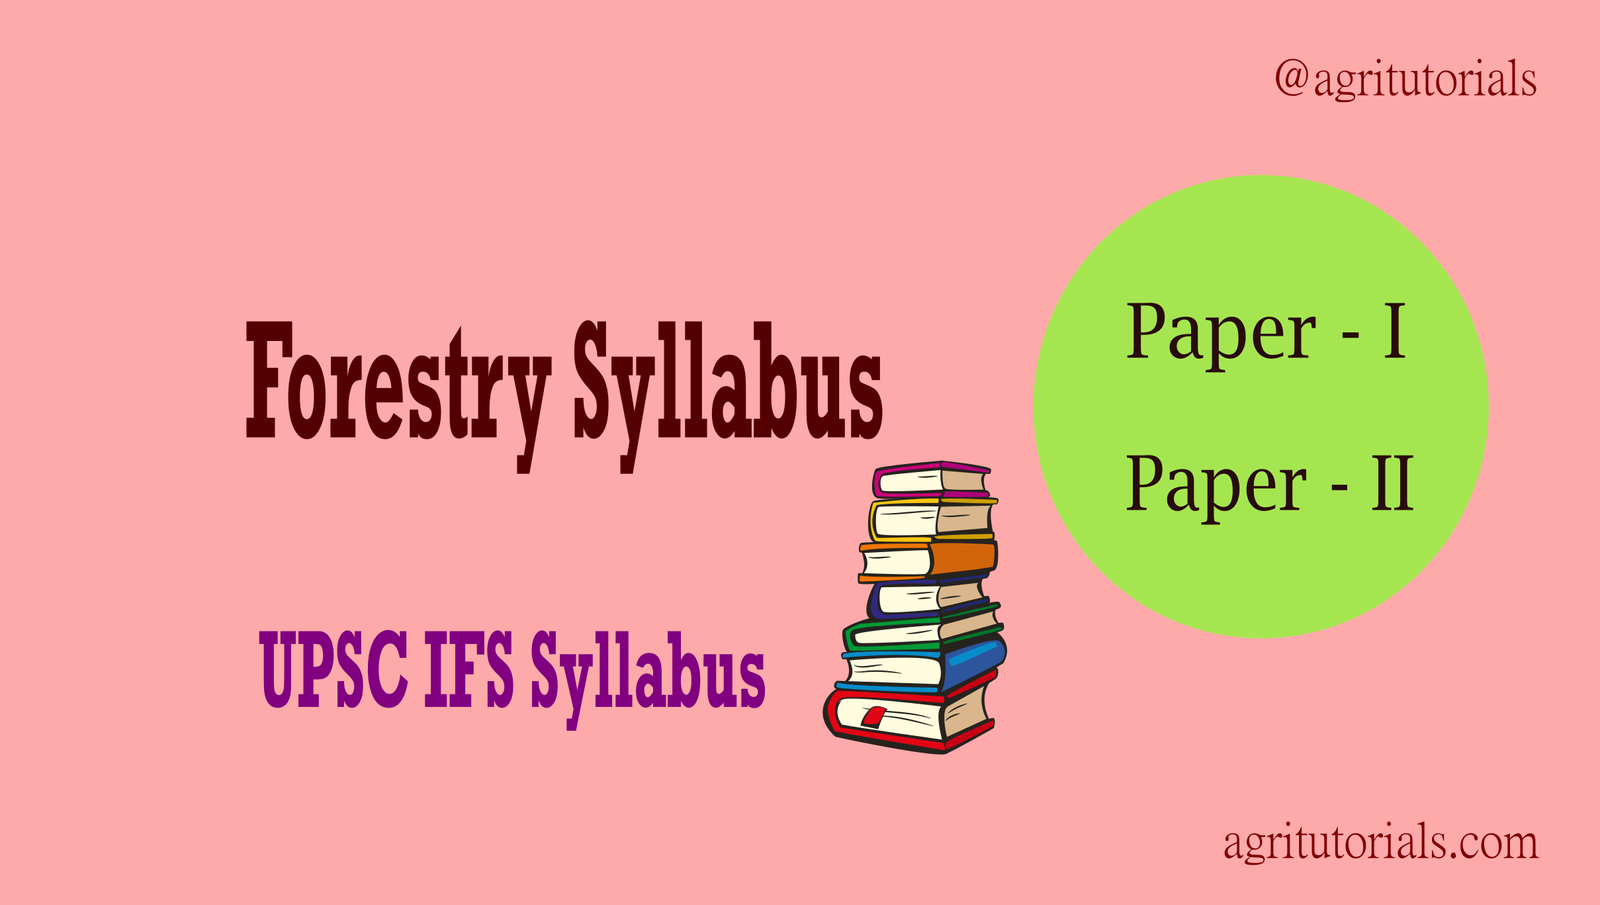 UPSC IFS Forestry | New Syllabus | Paper 1 & 2 |